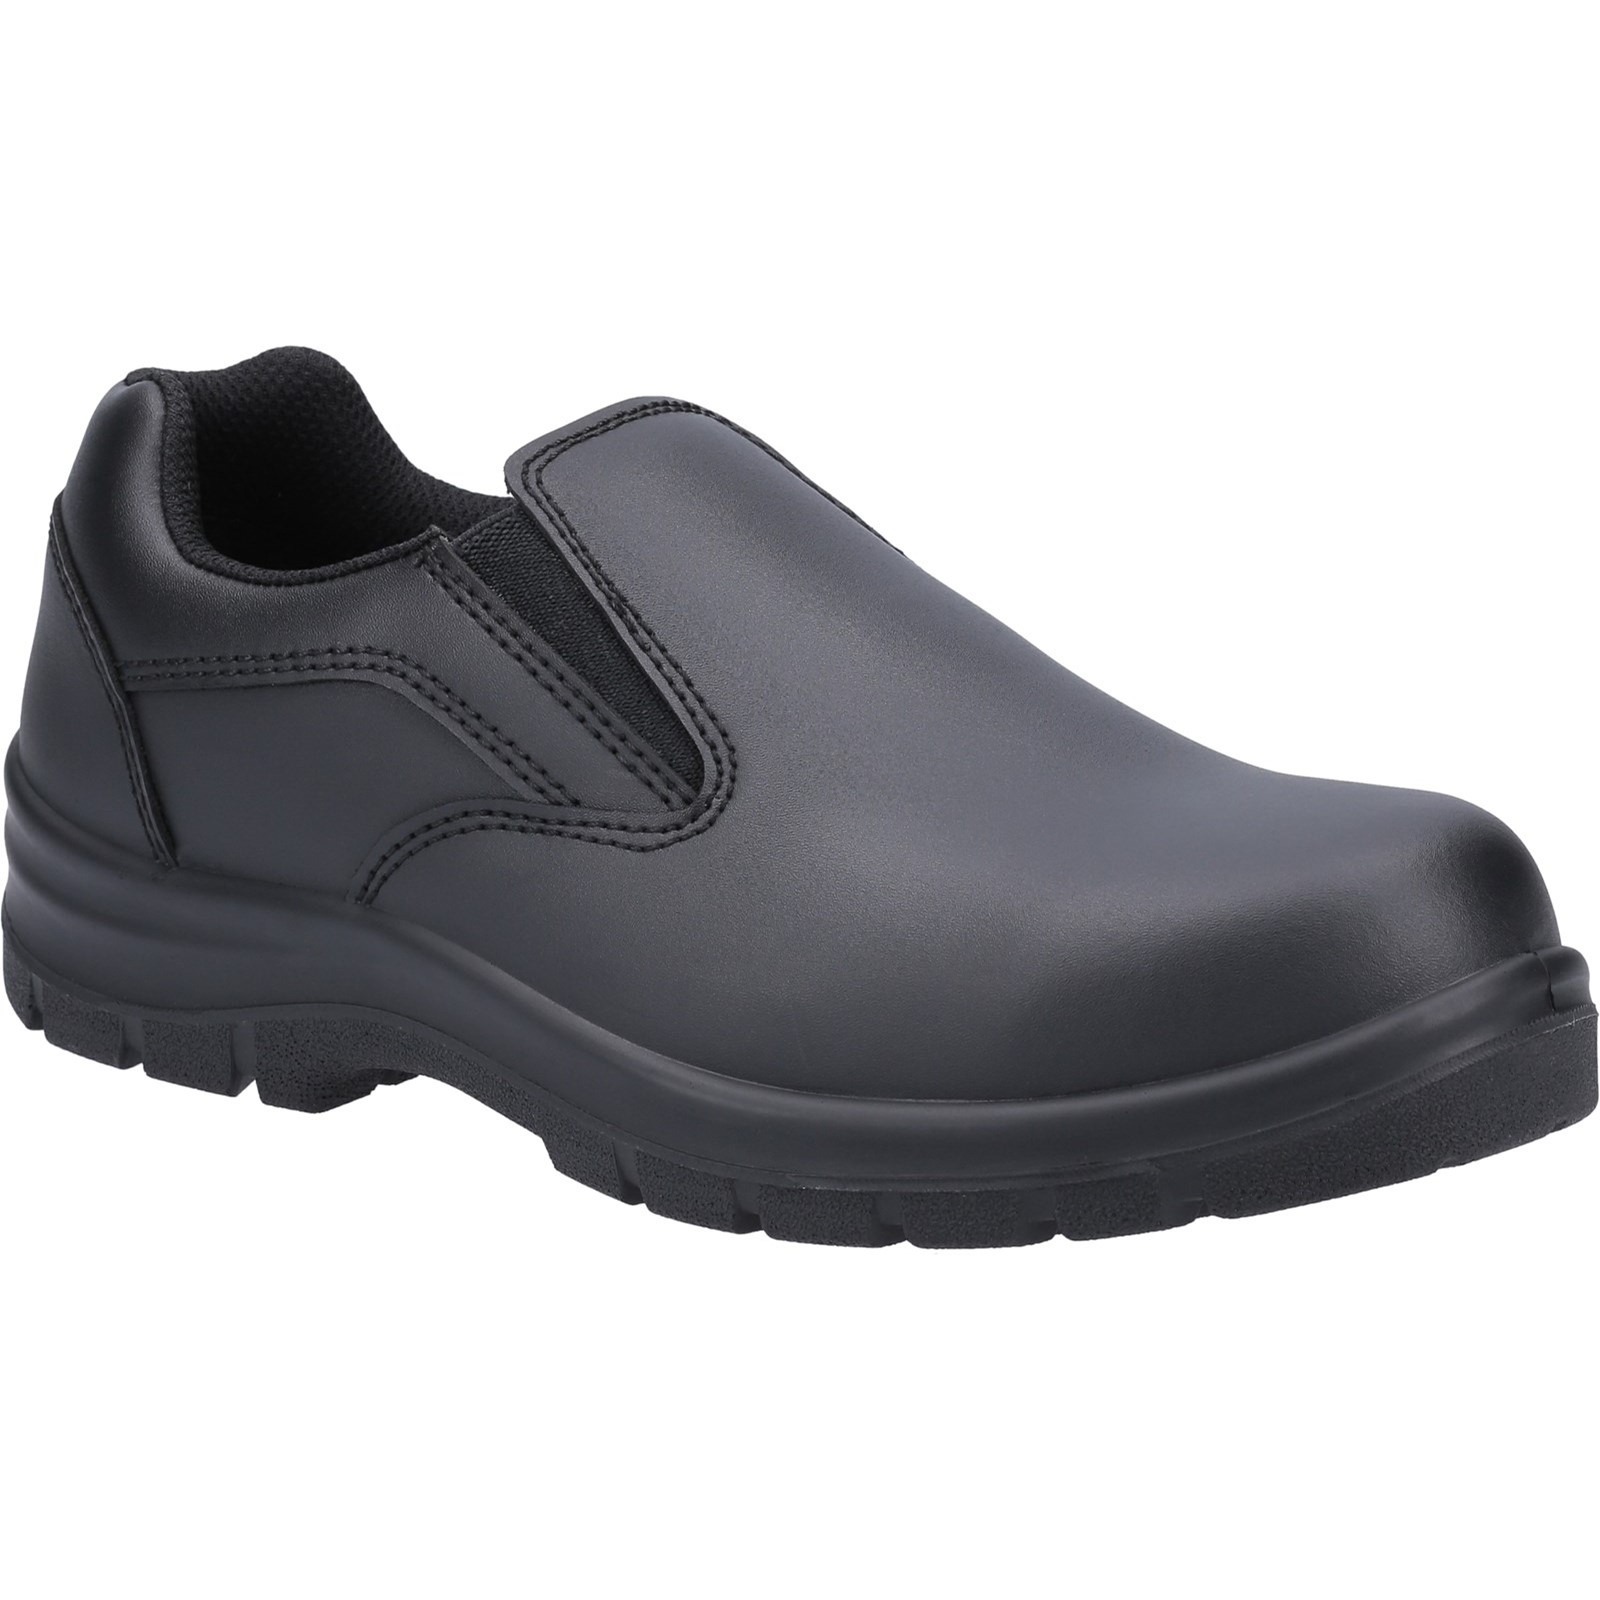 AS716C Safety Shoes - First Safety